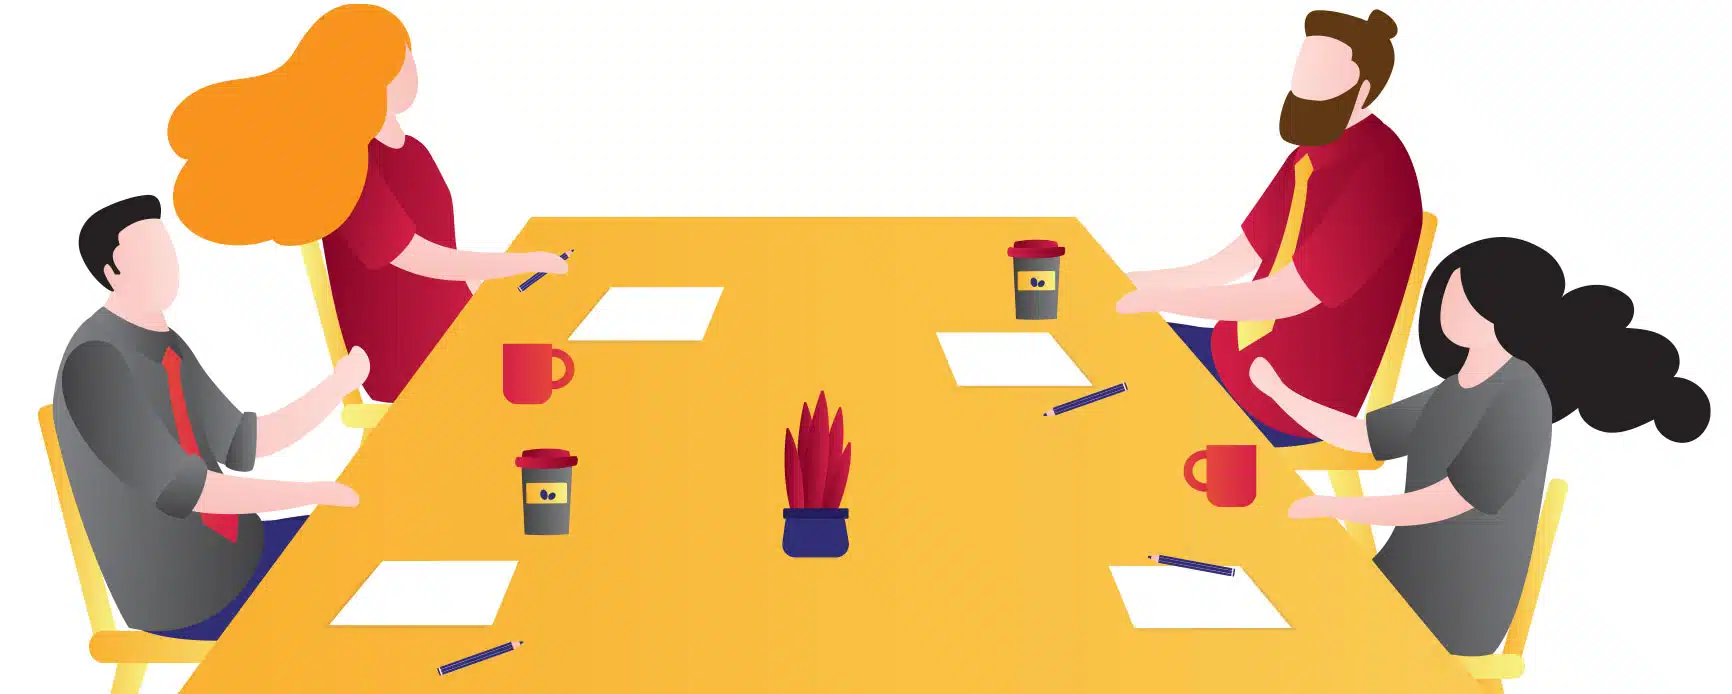 Illustration of a web team sitting around a table.